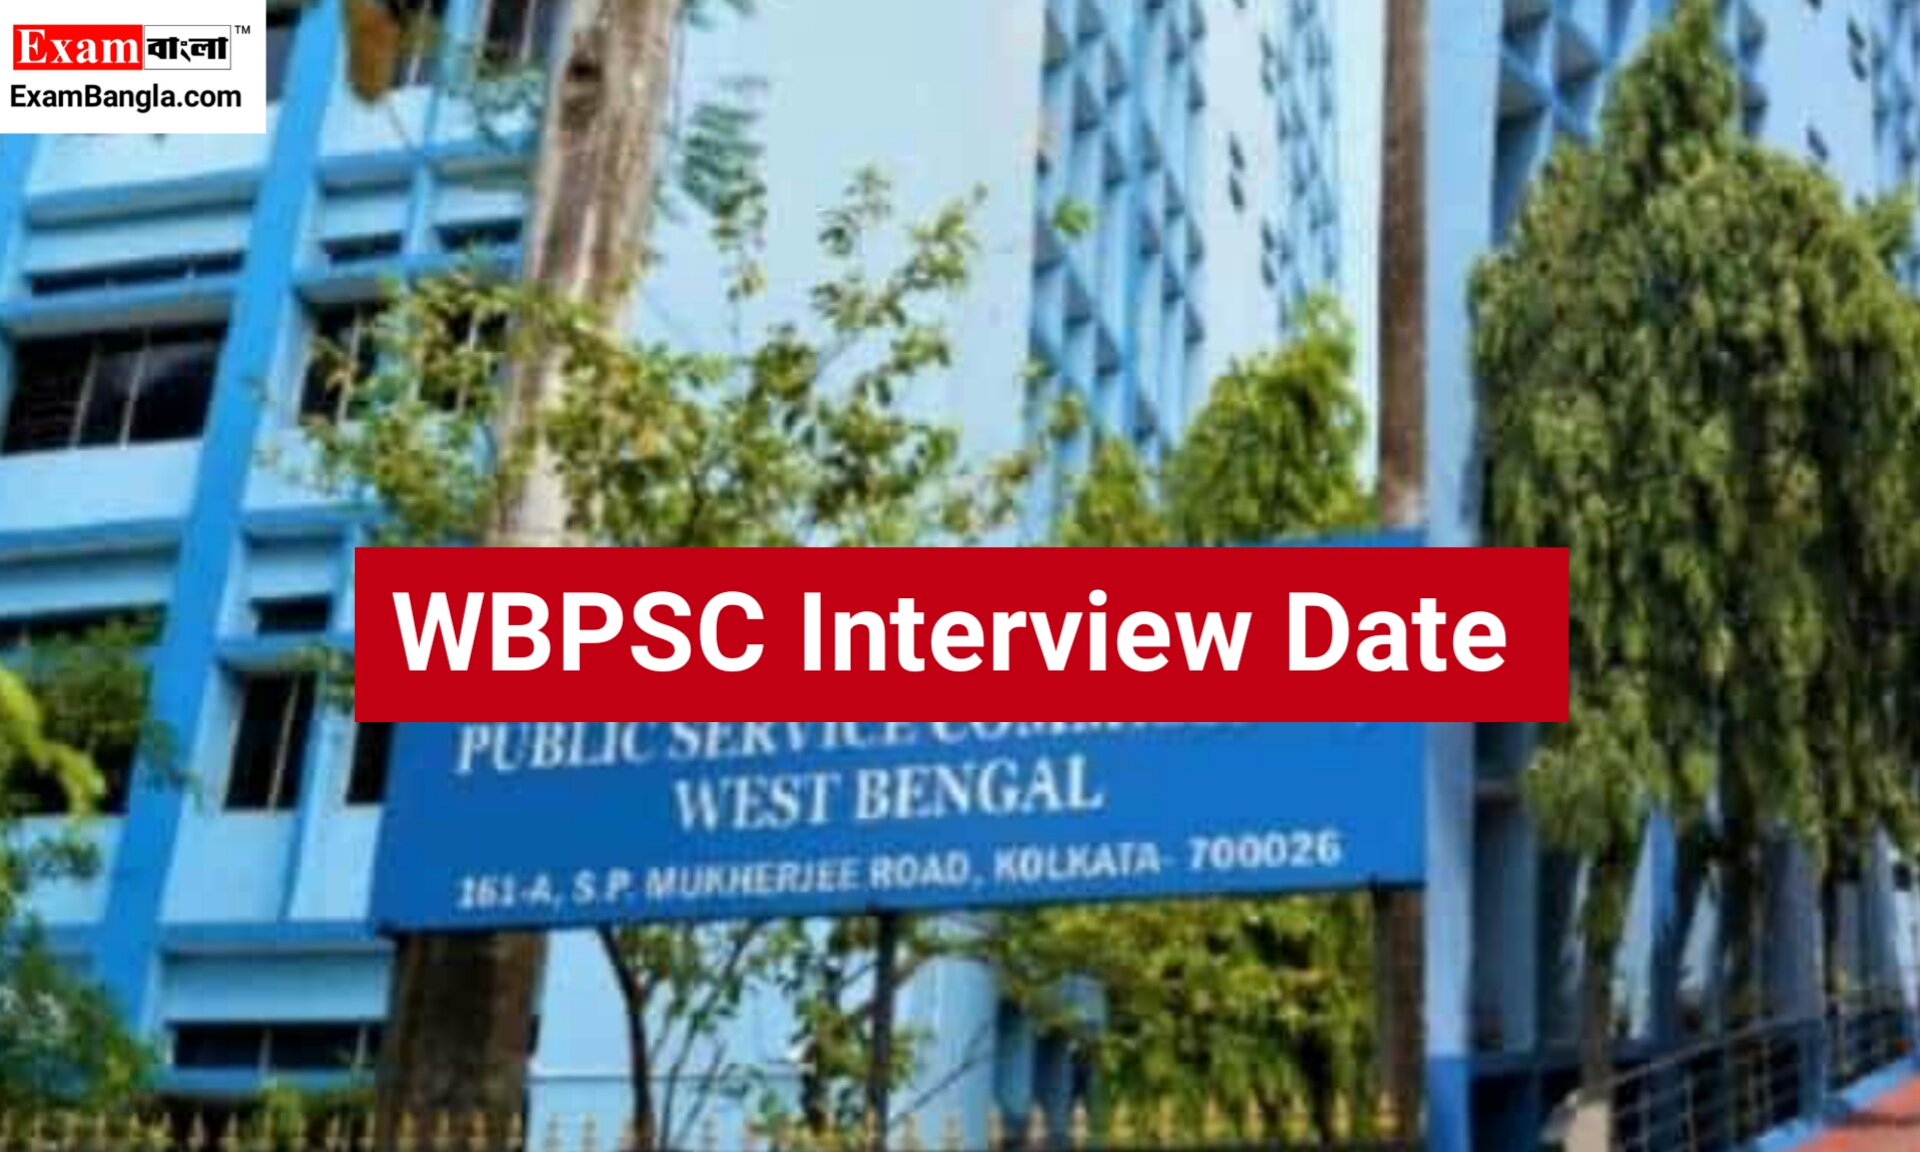 WBPSC Interview Date